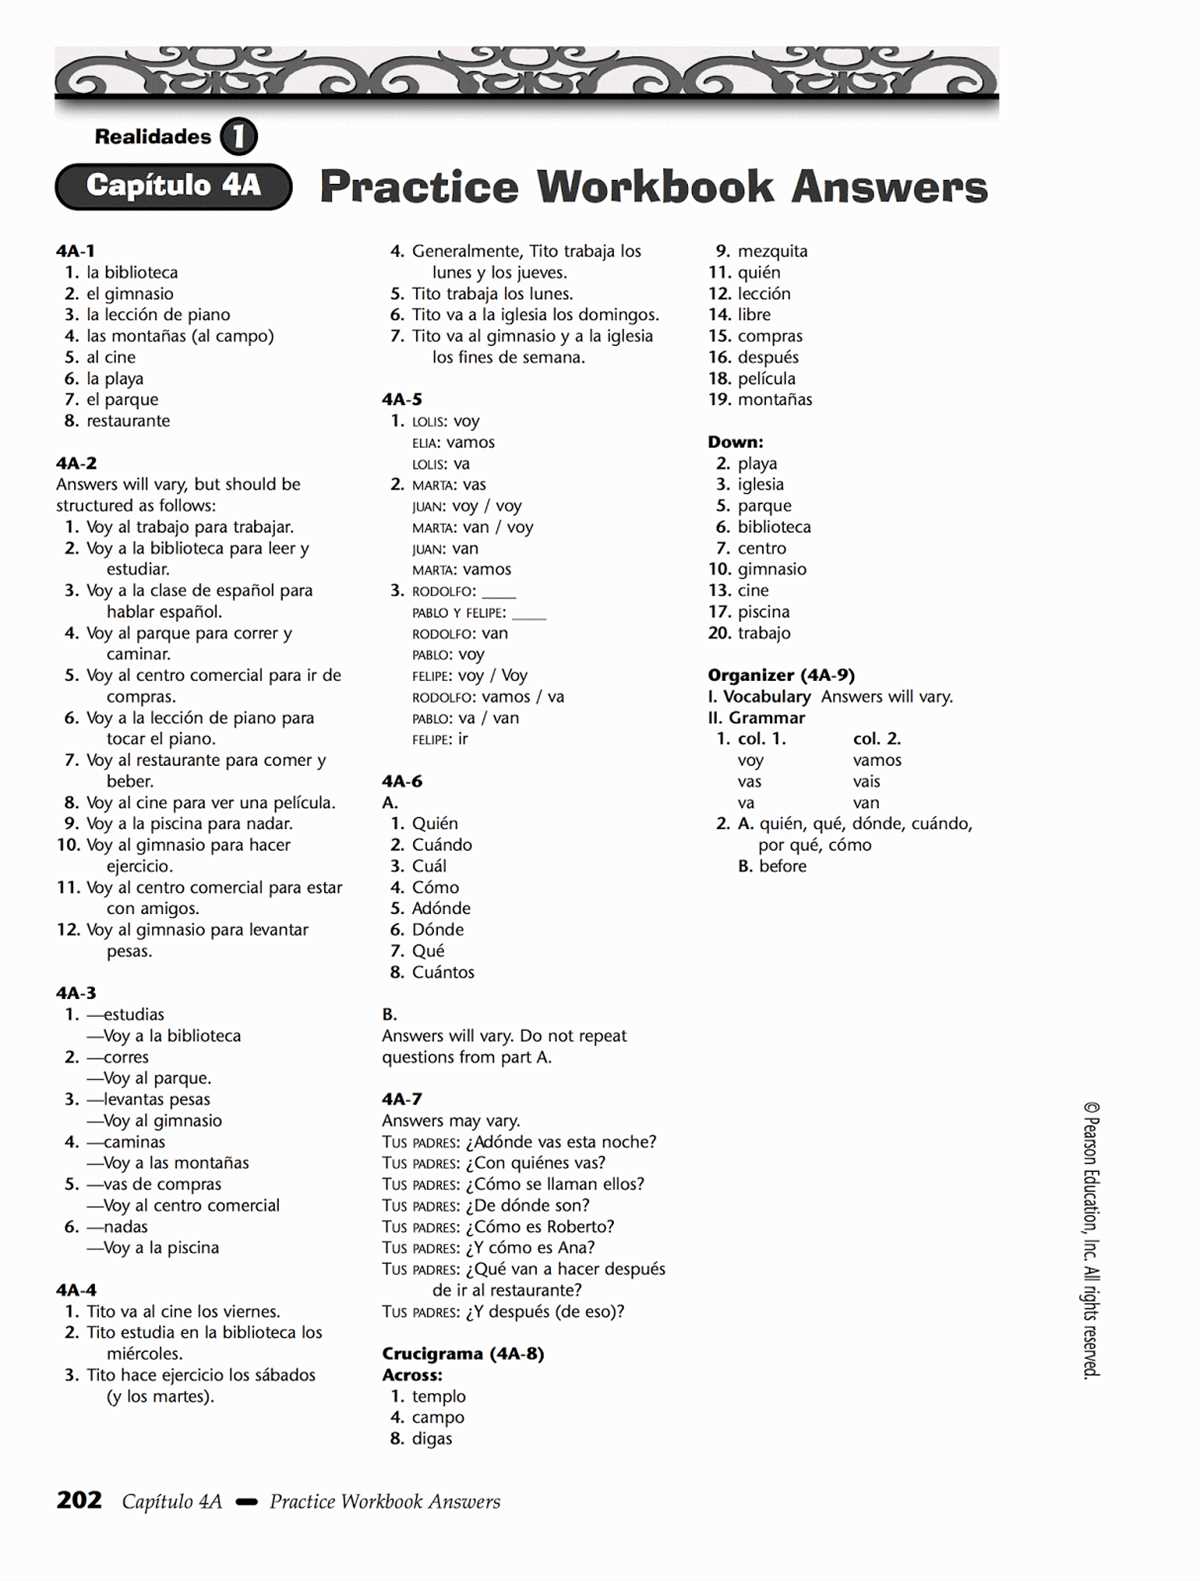 Essential Vocabulary for Realidades 2 Capitulo 1b Crossword